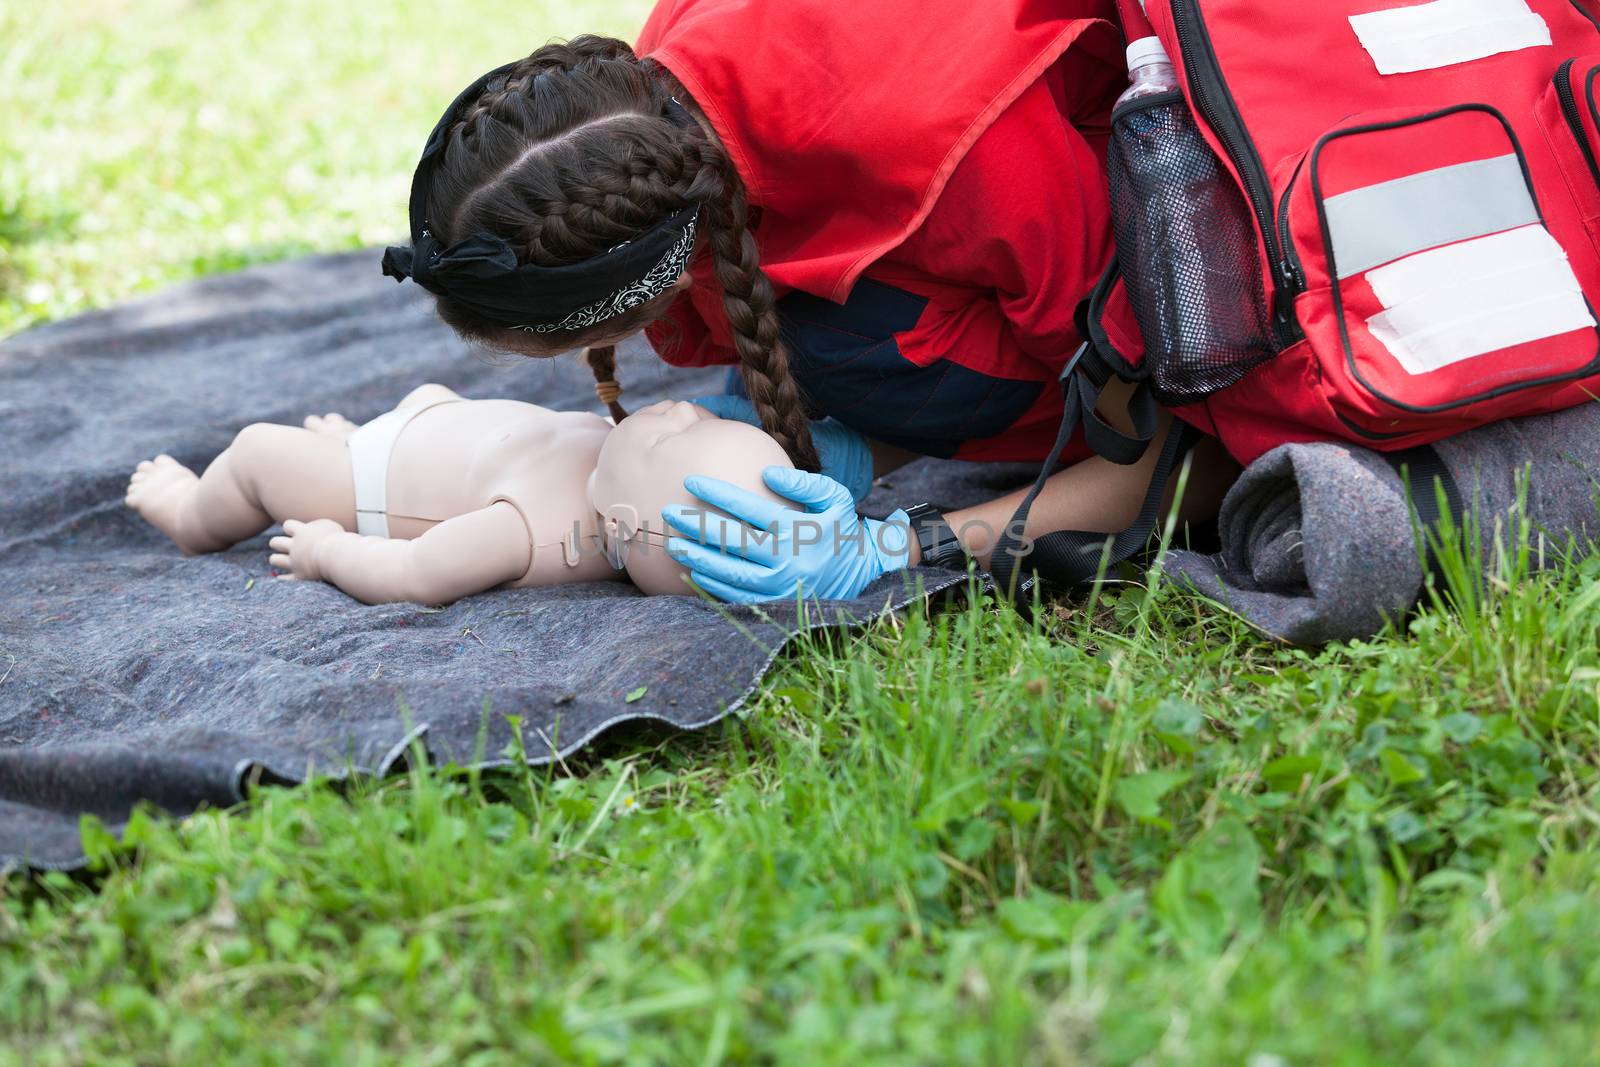 Paramedic demonstrate Cardiopulmonary resuscitation (CPR) on baby dummy by wellphoto